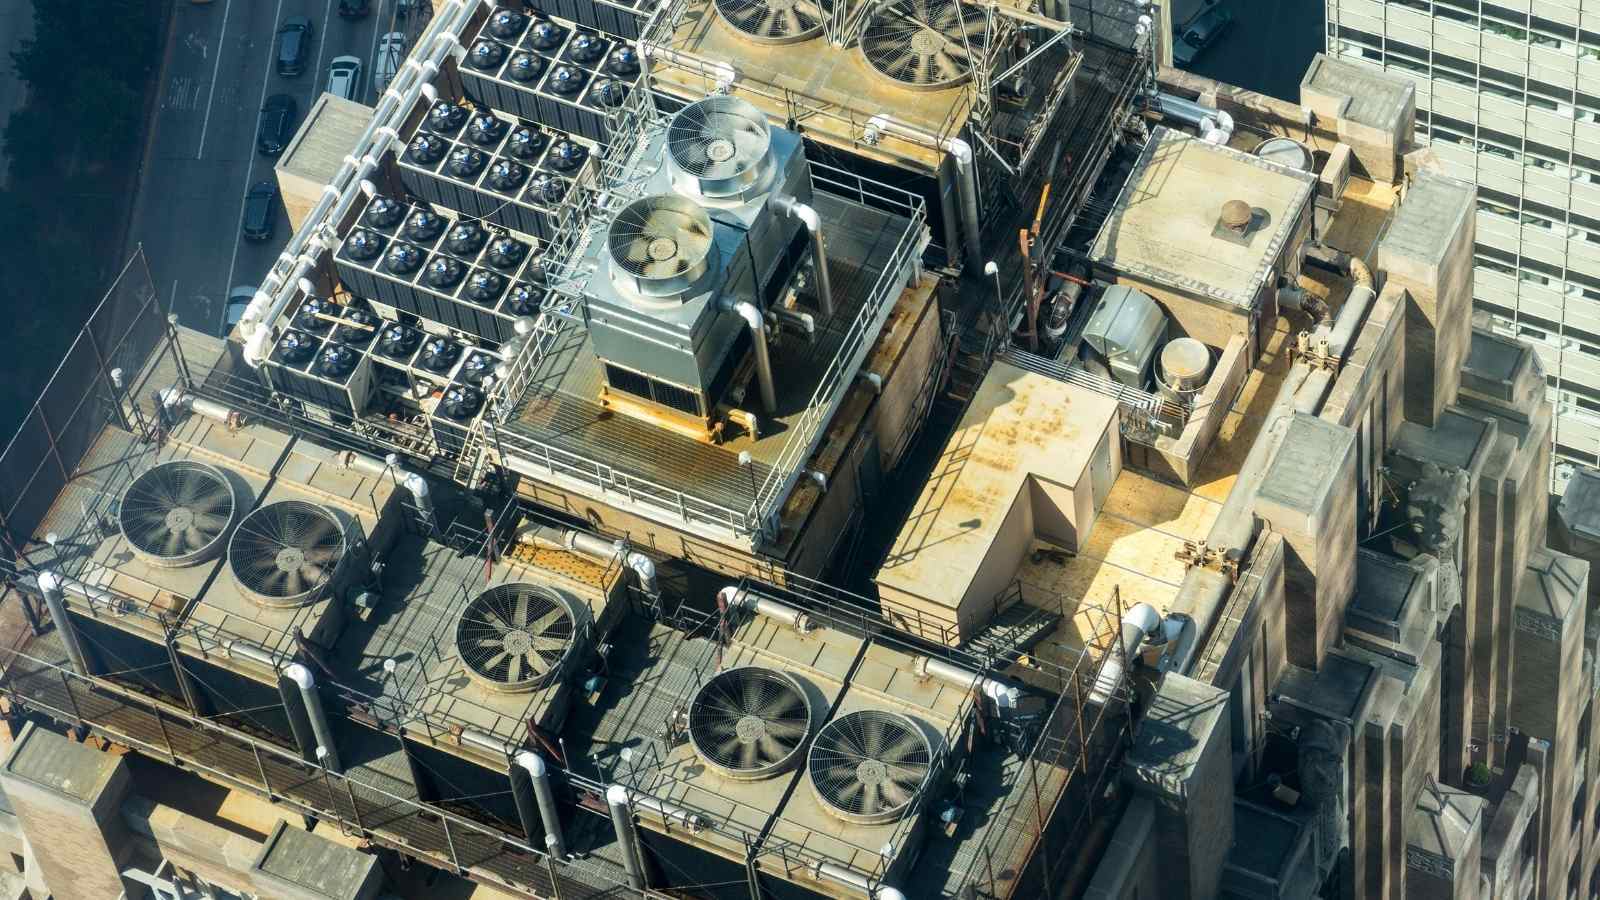 An overhead view of HVAC units on top of a building